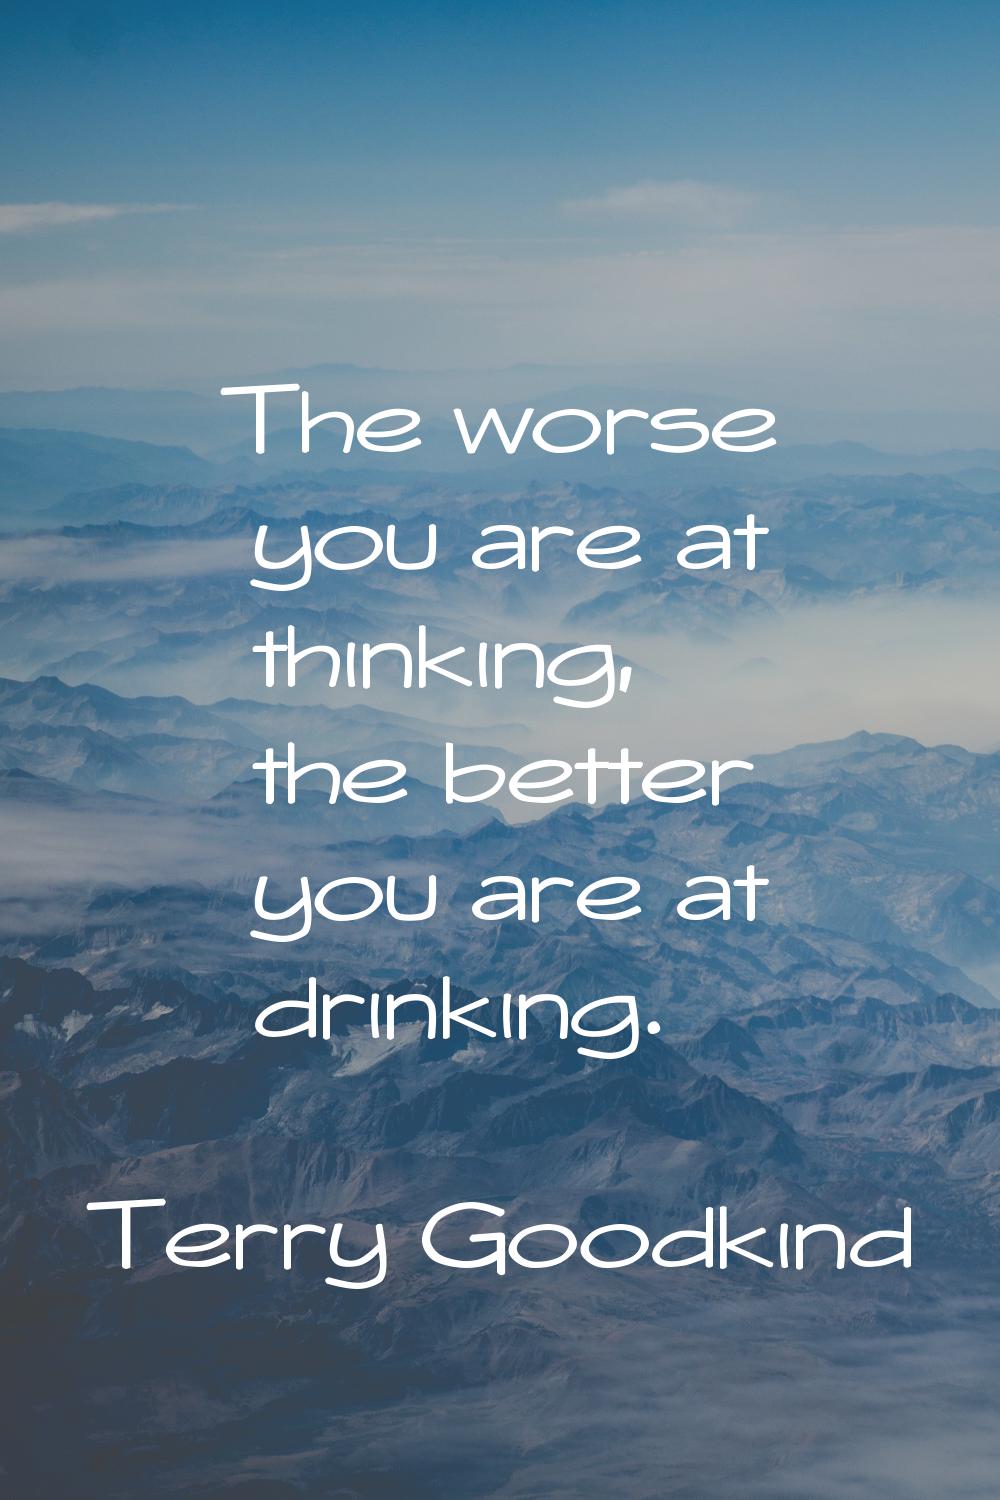 The worse you are at thinking, the better you are at drinking.